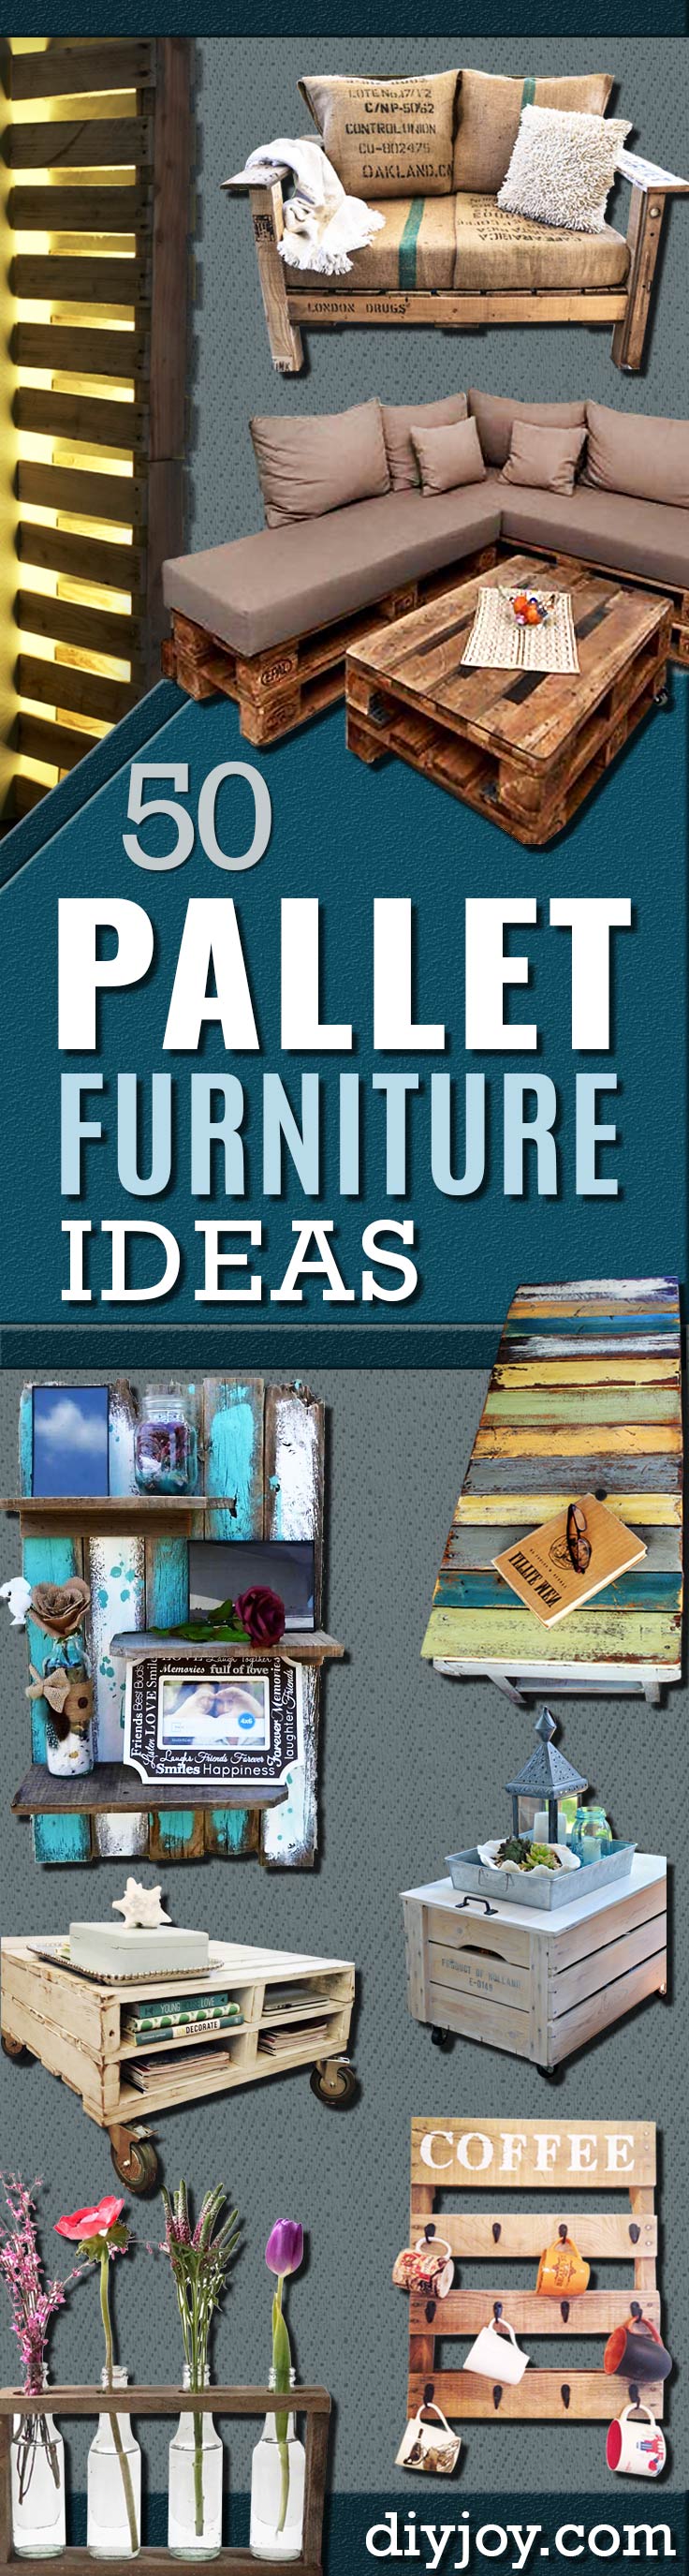 DIY Pallet Furniture Ideas - Best Do It Yourself Projects Made With Wooden Pallets - Indoor and Outdoor, Bedroom, Living Room, Patio. Coffee Table, Couch, Dining Tables, Shelves, Racks and Benches 